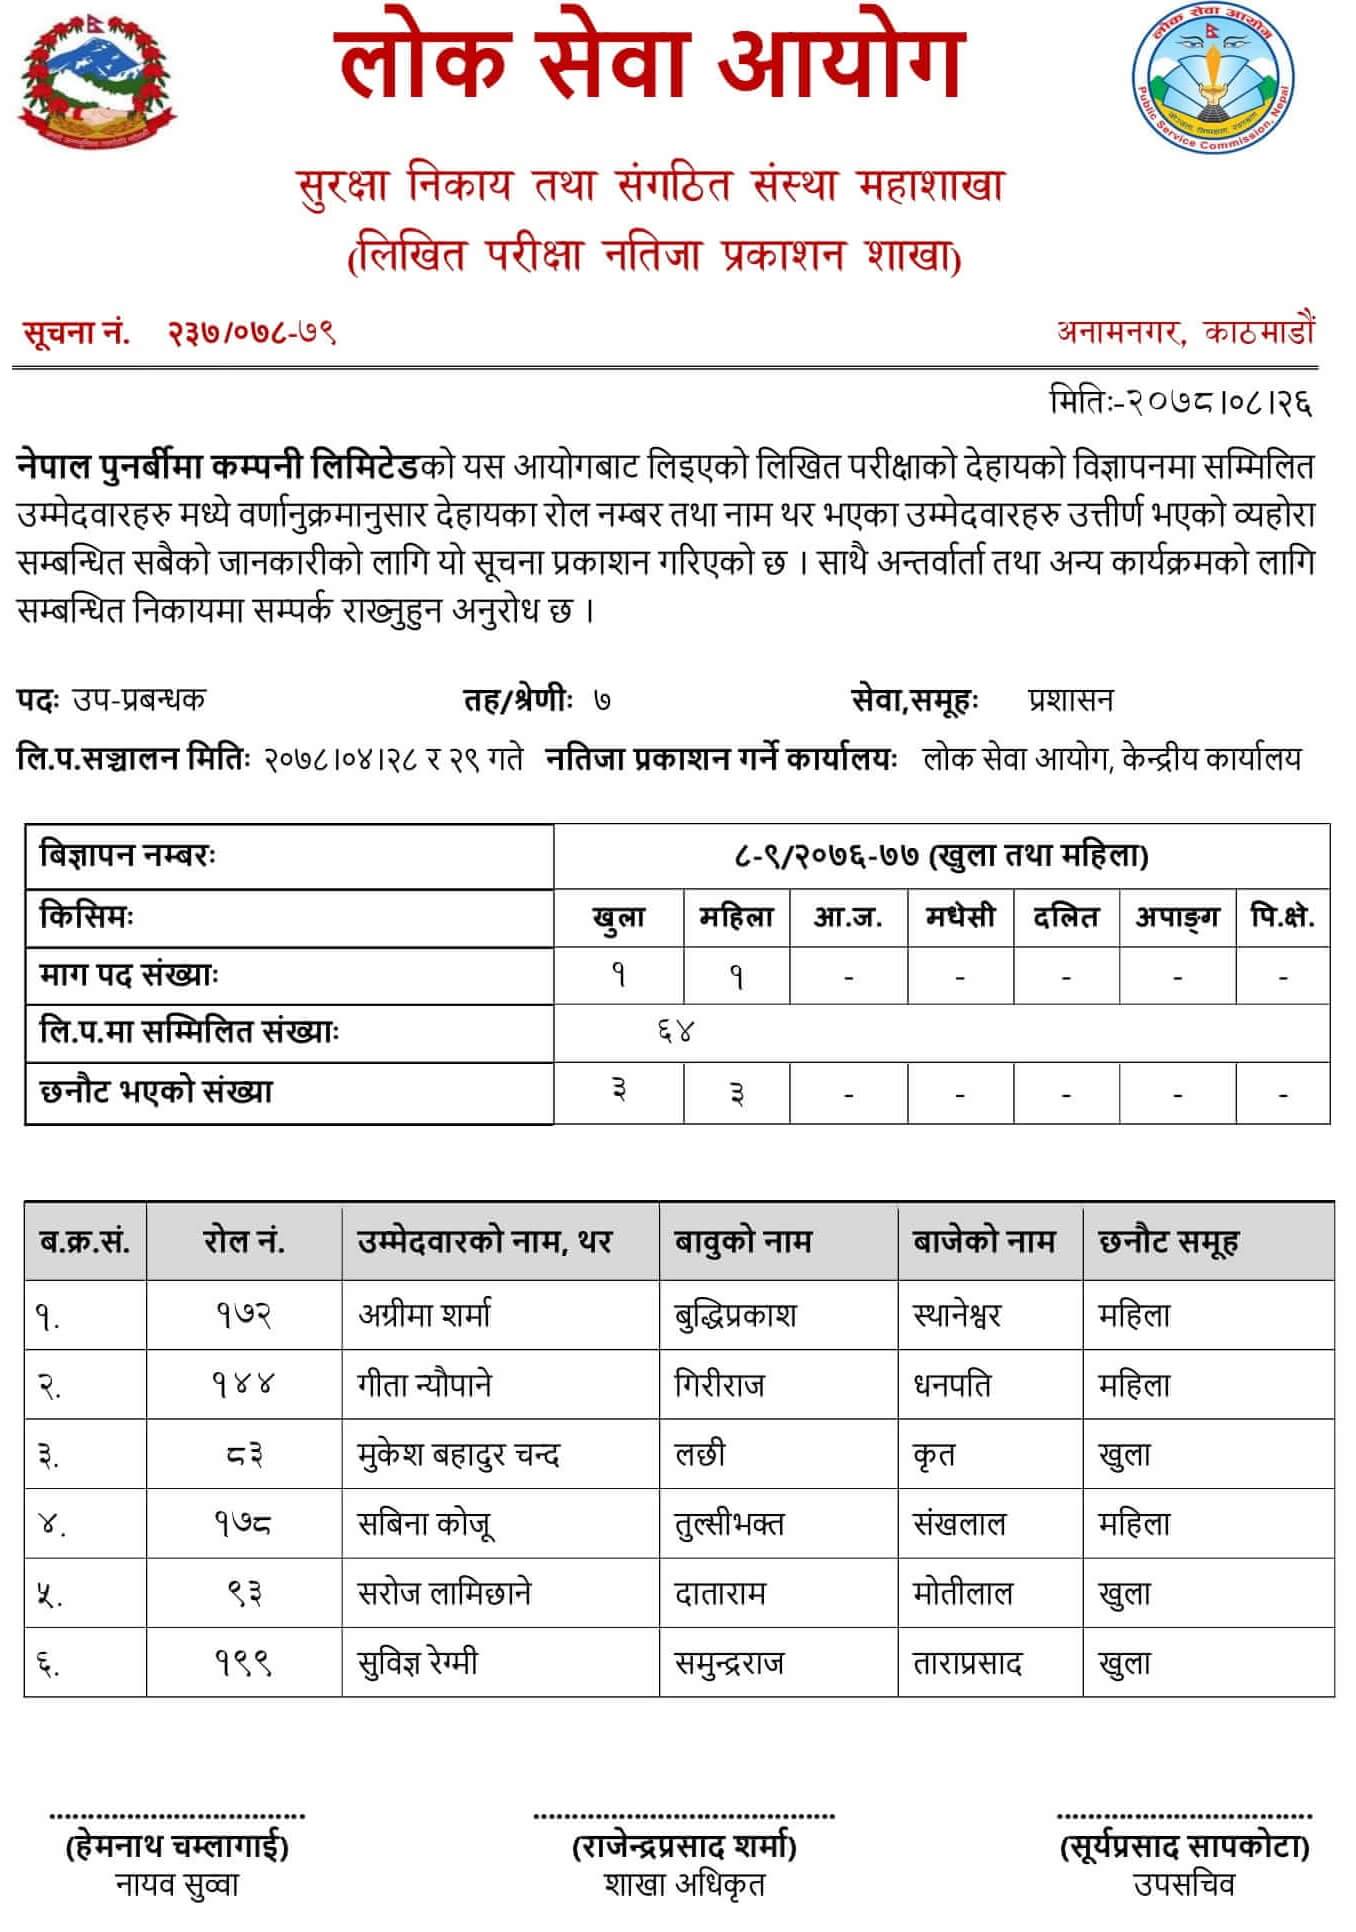 Nepal Re-Insurance Company Limited Written Exam Result